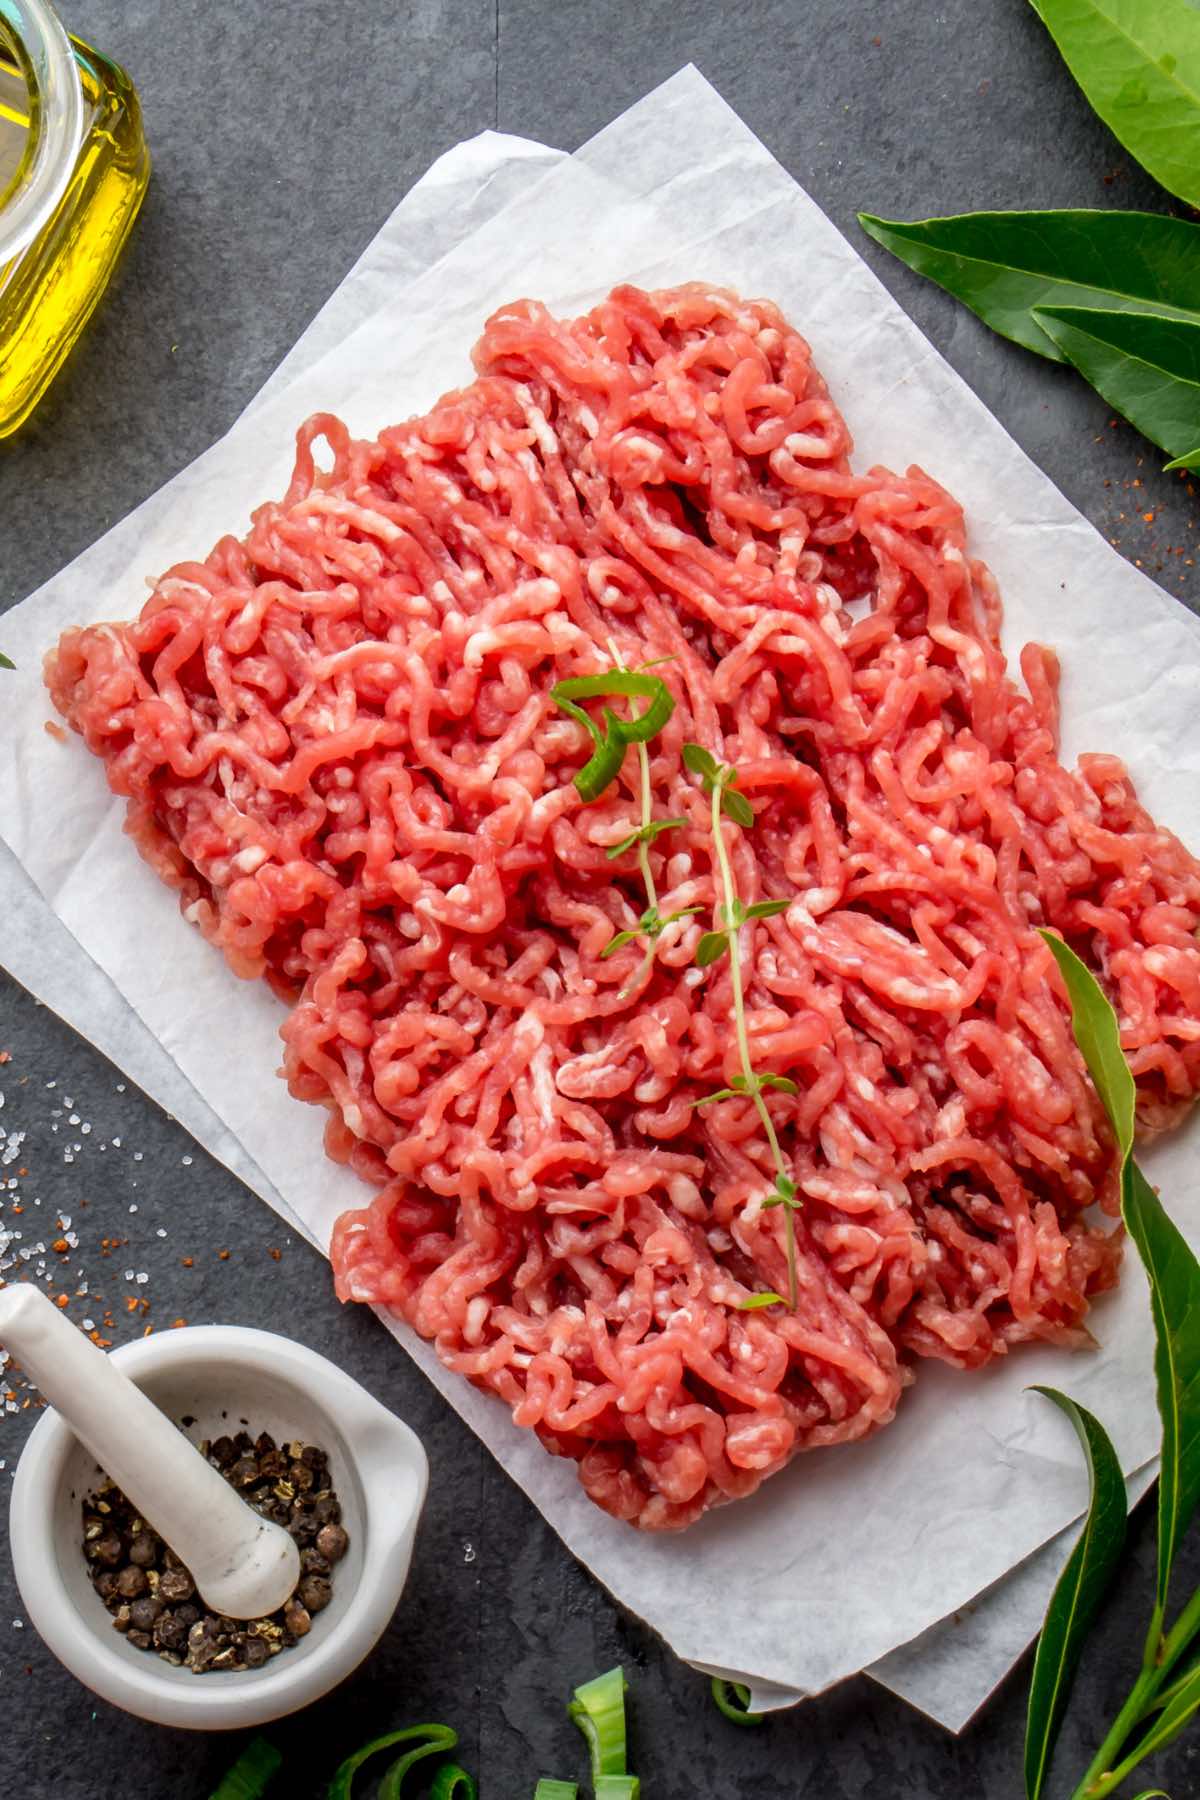 how long is cooked ground beef good in the fridge